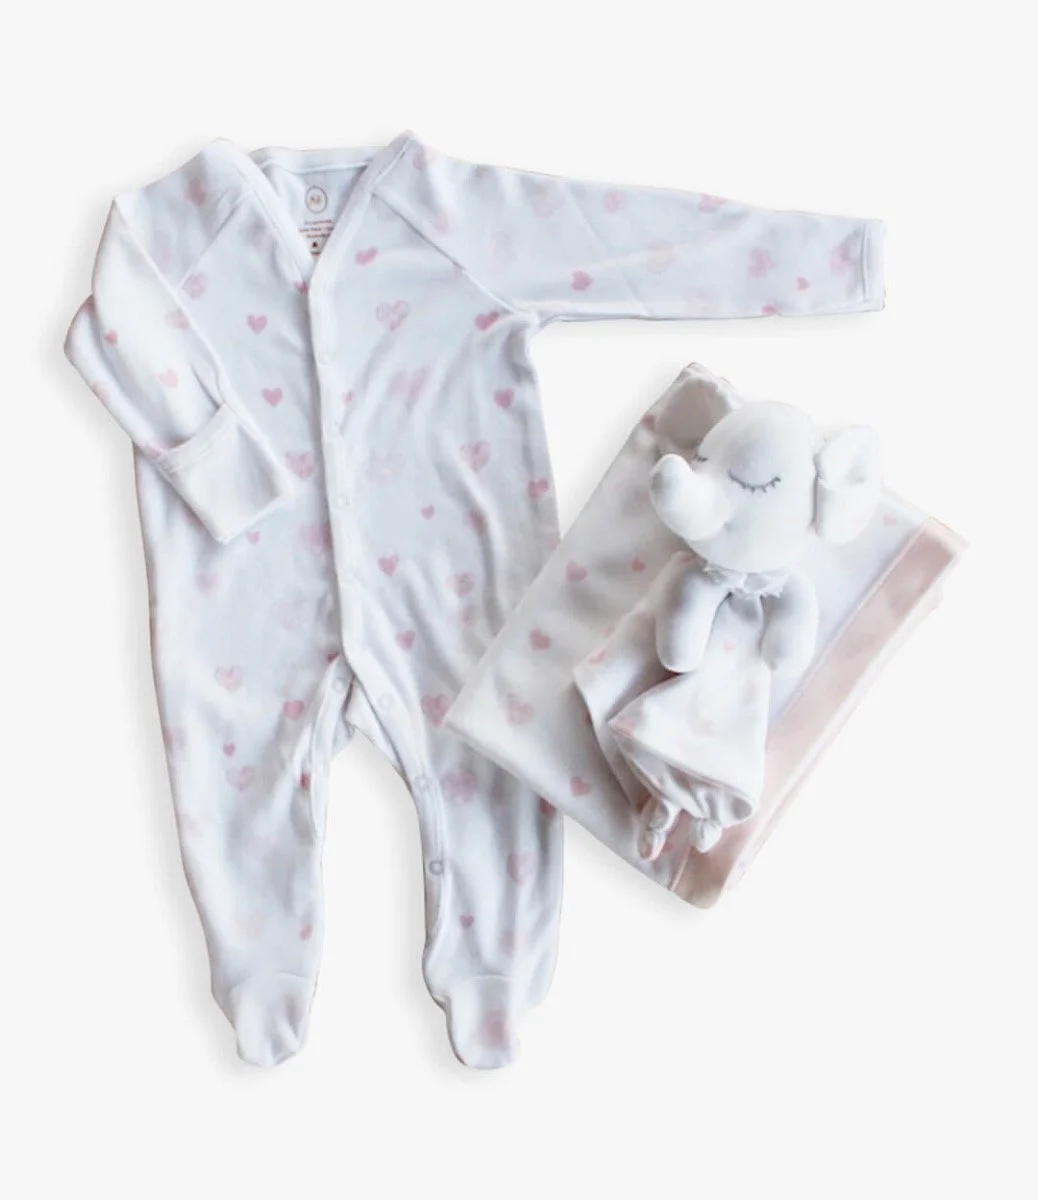 Newborn Romper, Blanket and Lovey Set -Pink  By Fofinha